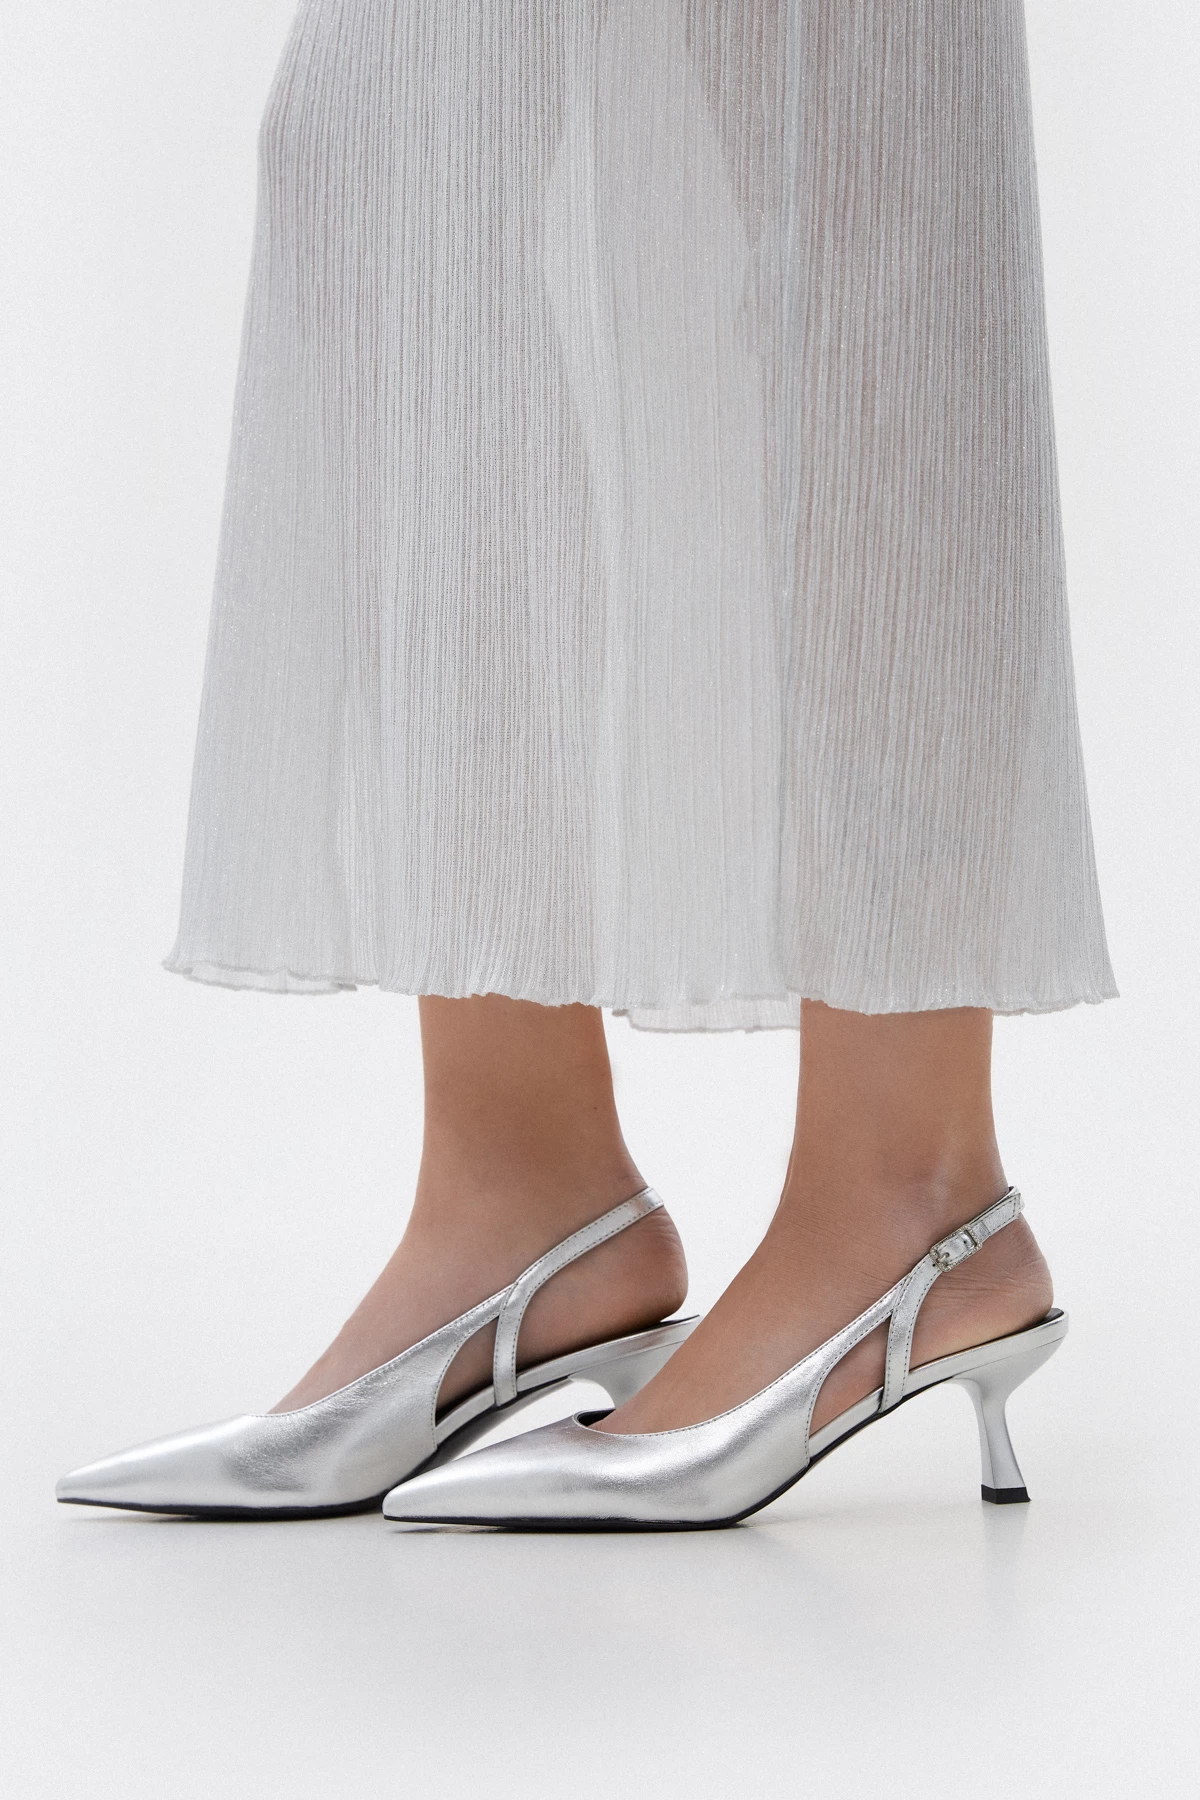 Silver leather slingbacks Estro x MustHave, photo 2